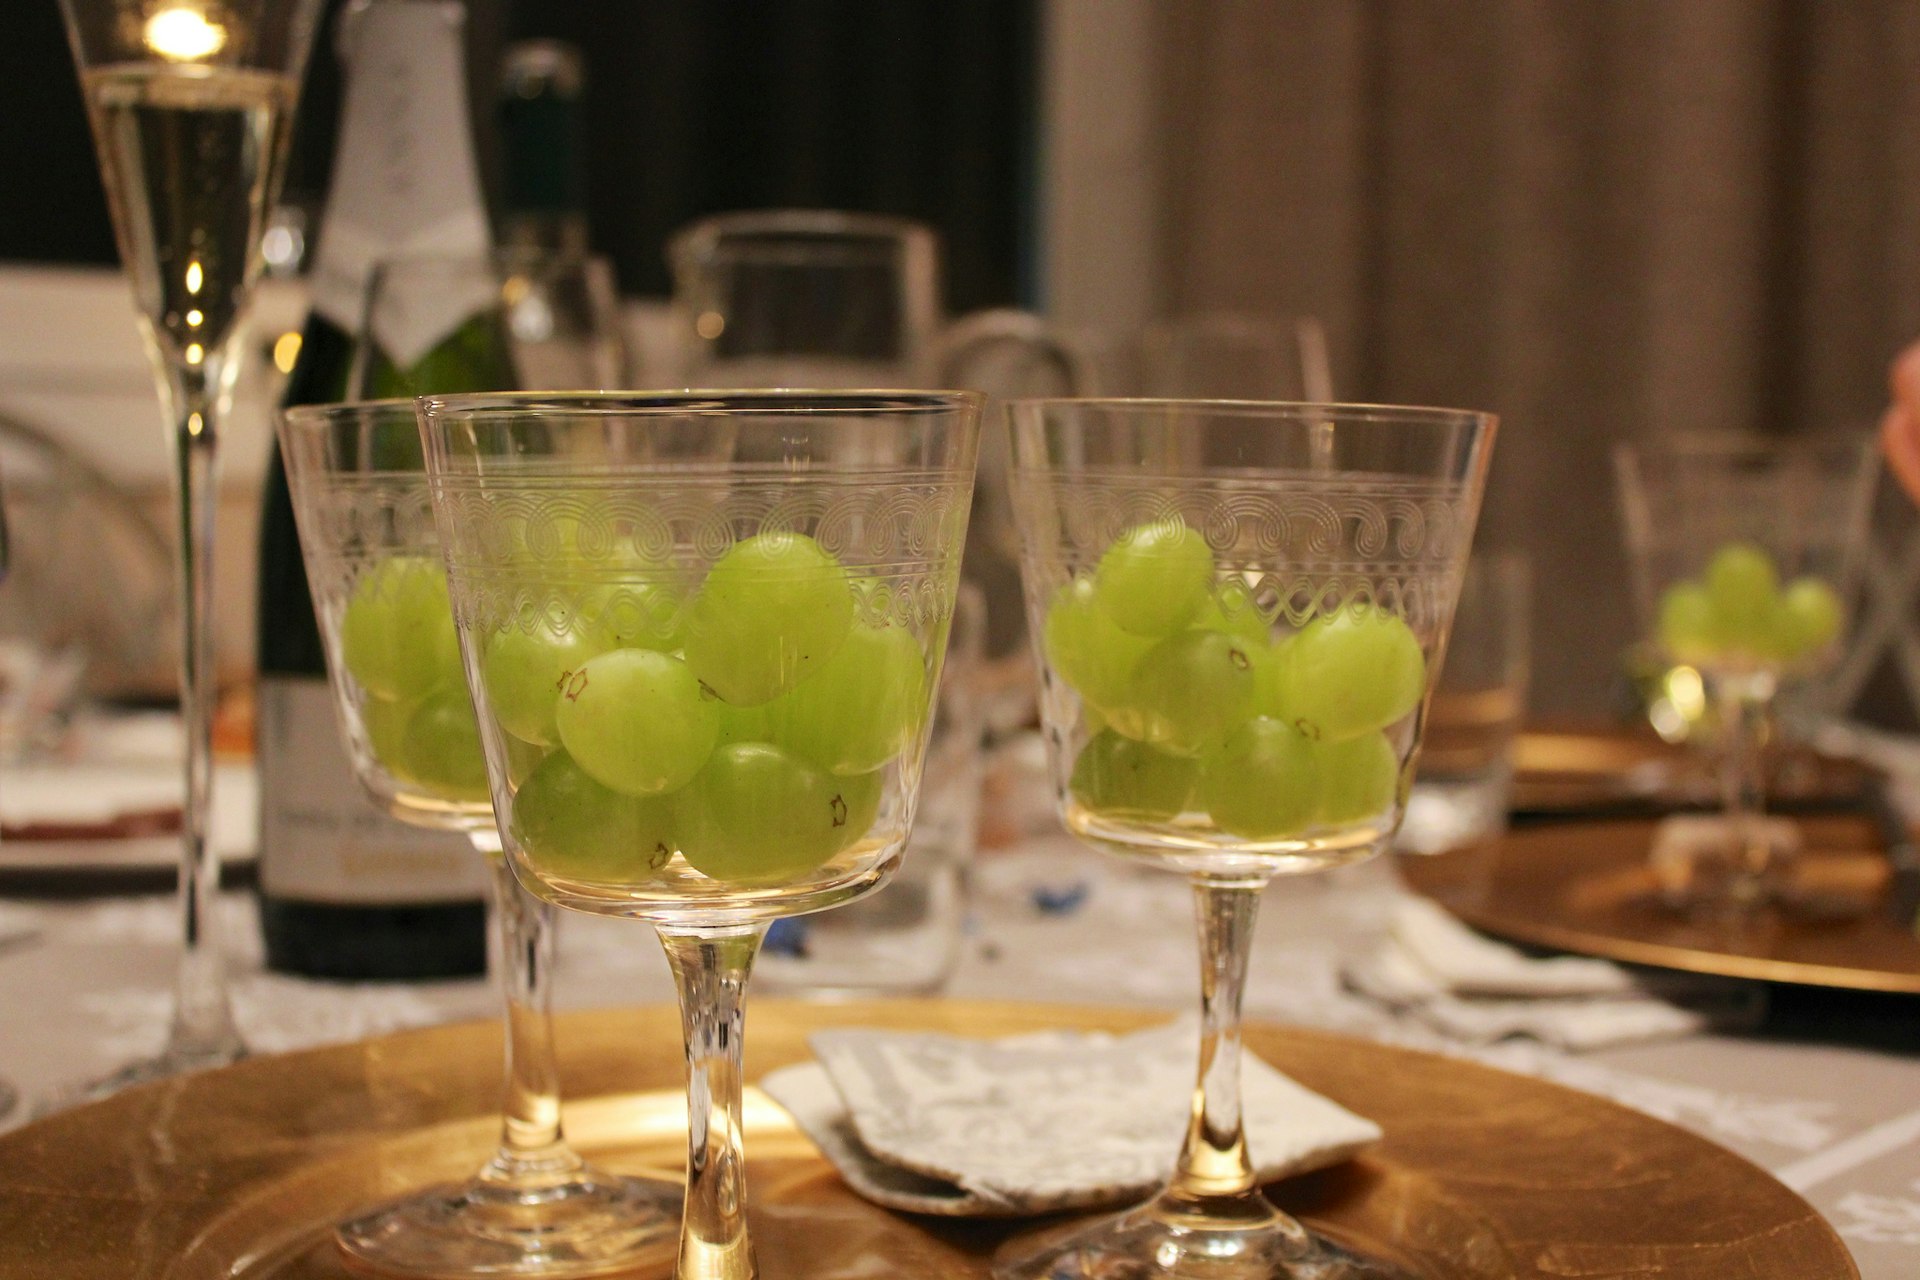 12 grapes for each strike at midnight. Image by Chris Oakley / CC BY 2.0